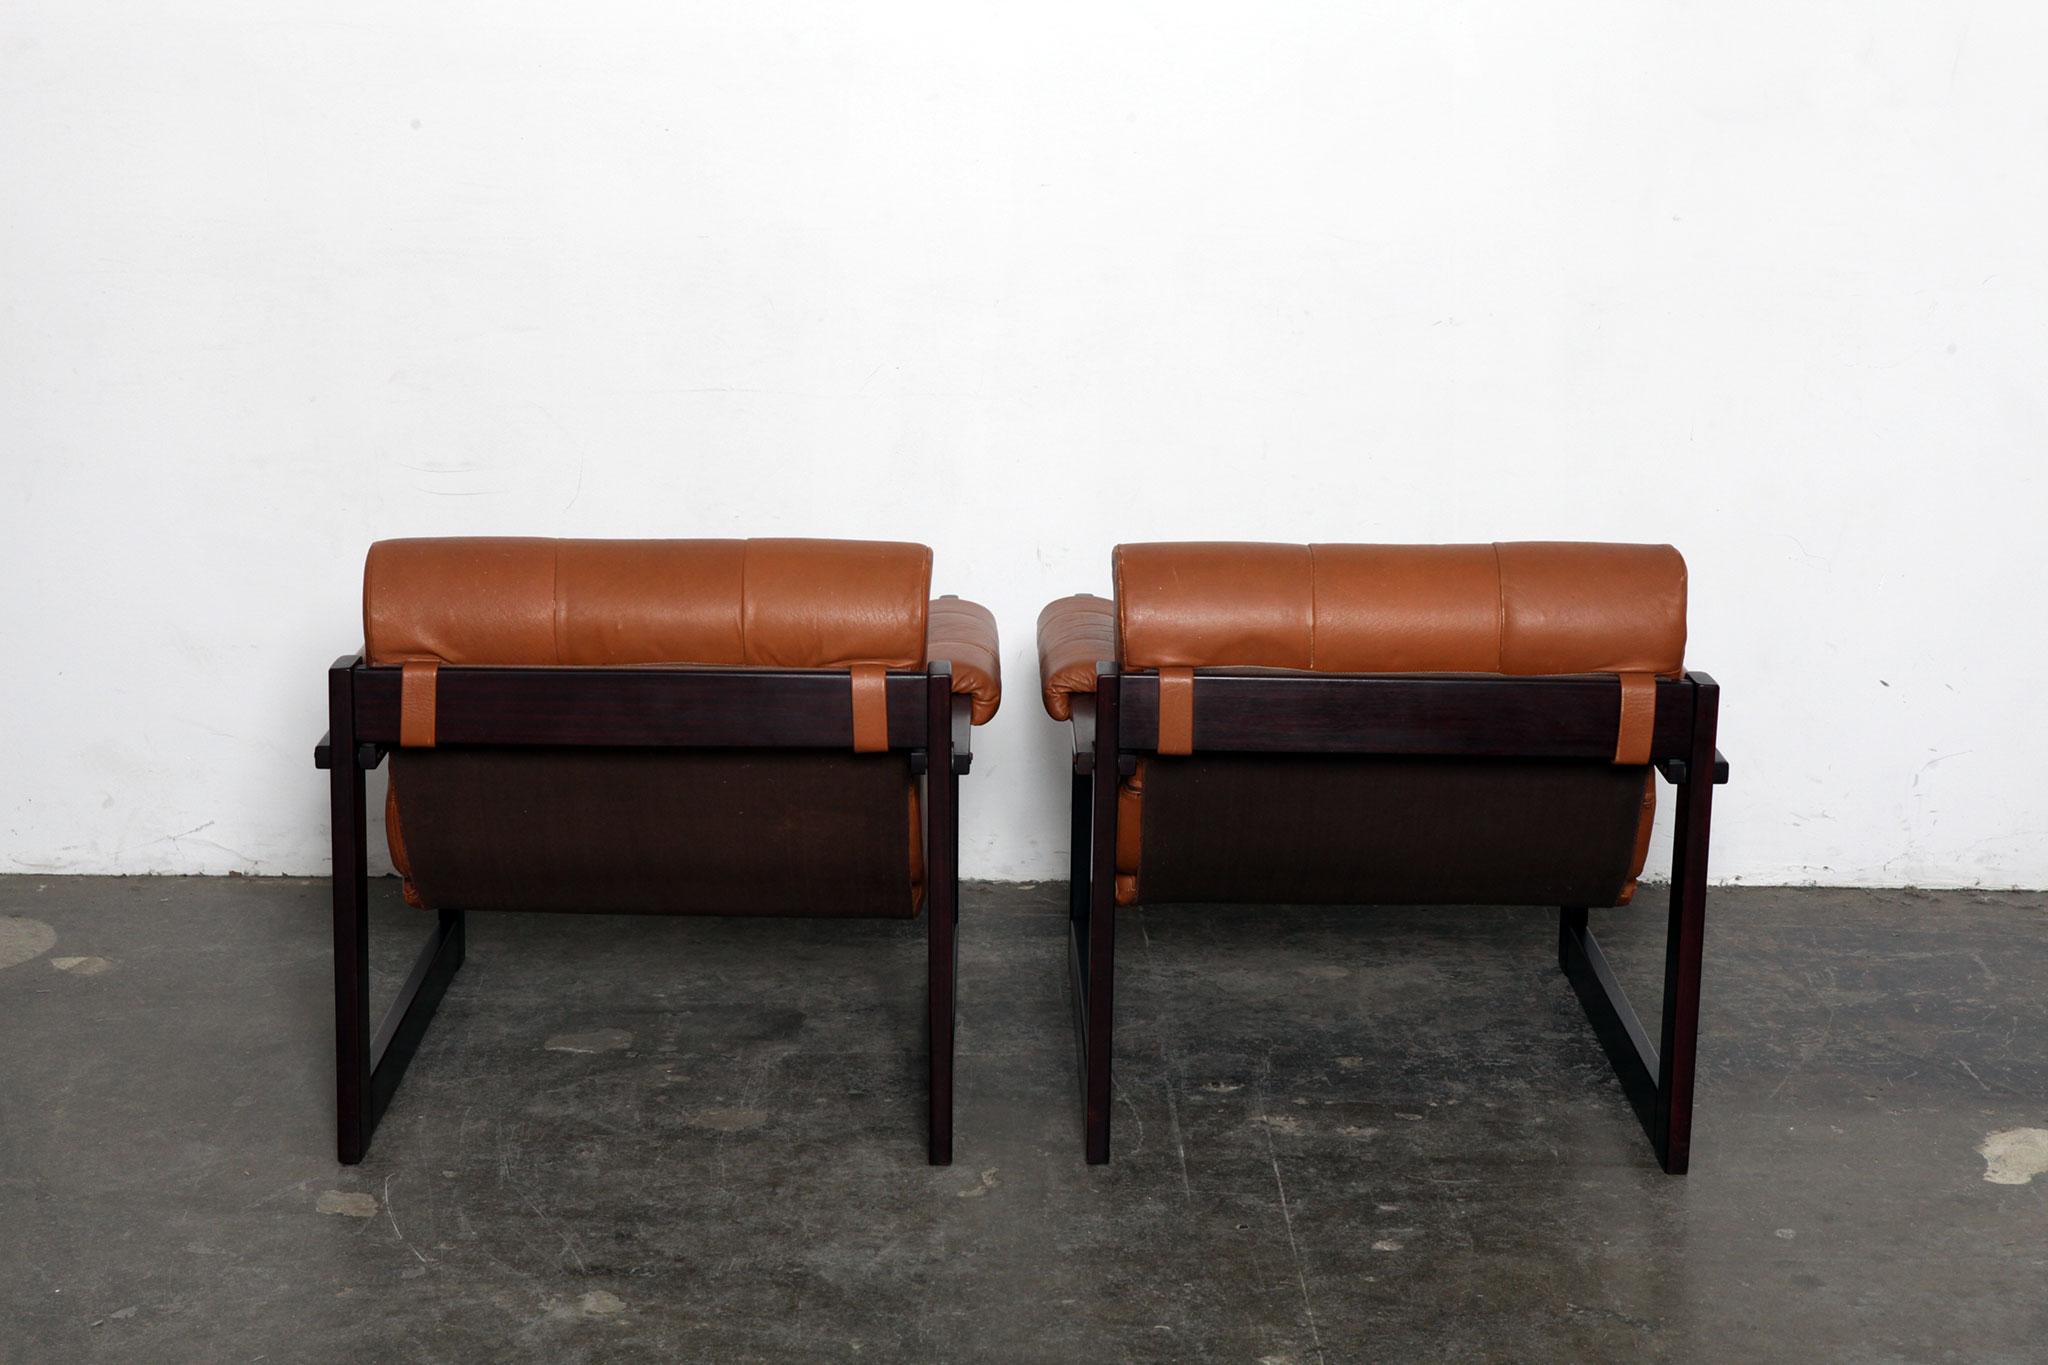 Brazilian Pair of Percival Lafer MP-167 Leather and Jatoba Lounge Chairs, Brazil, 1970s